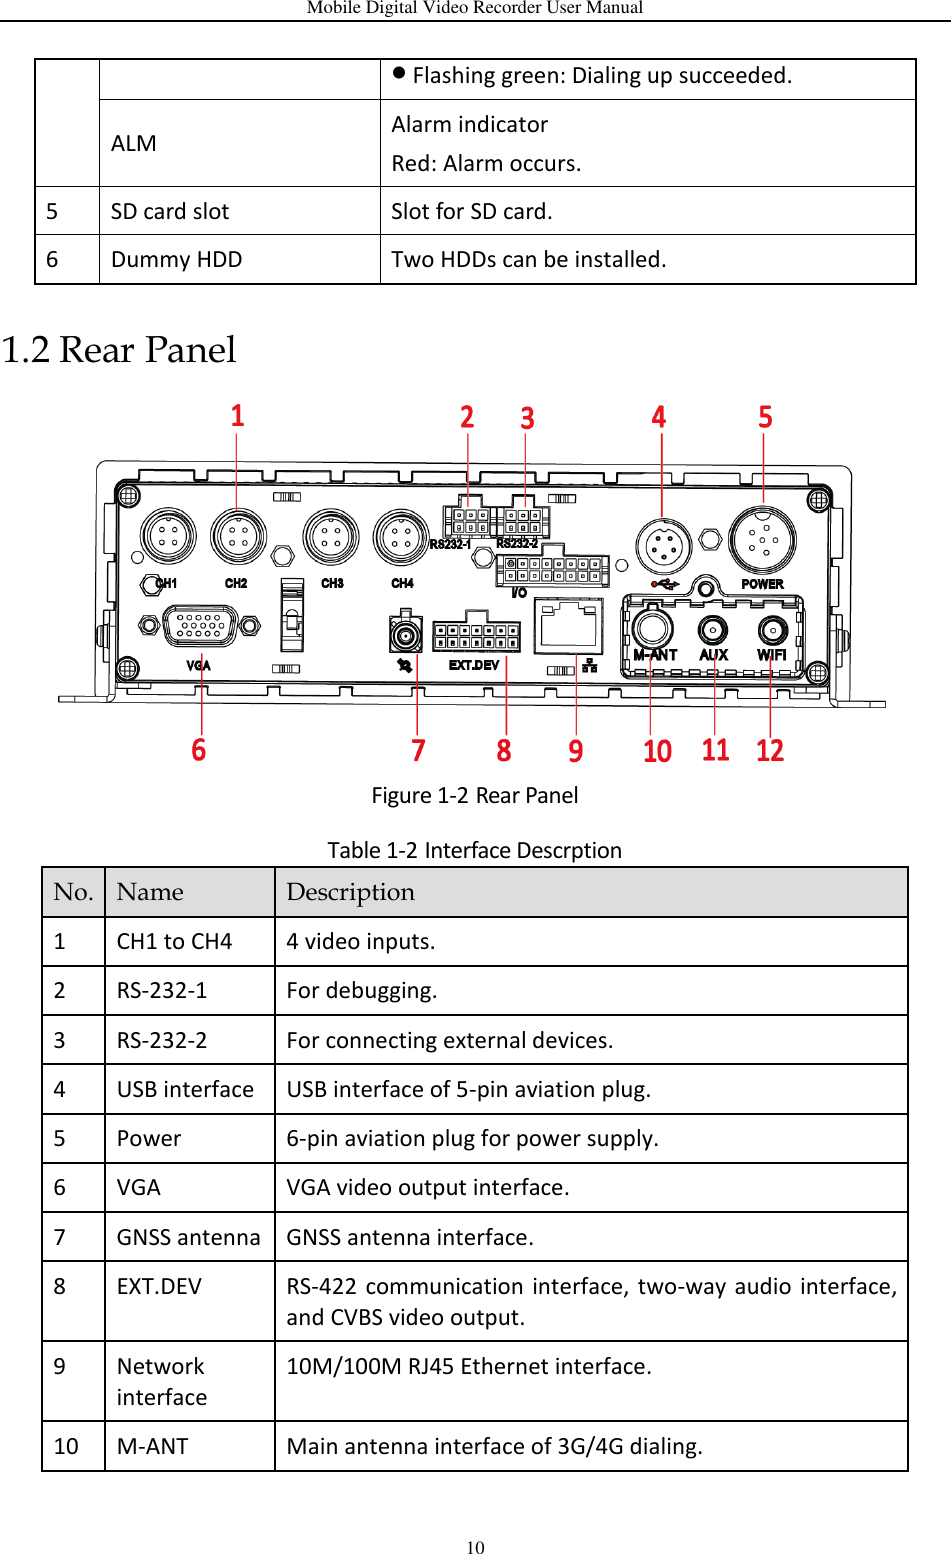 Mobile Digital Video Recorder User Manual 10 1.2 Rear Panel  Figure 1-2 Rear Panel Table 1-2 Interface Descrption  Flashing green: Dialing up succeeded. ALM Alarm indicator Red: Alarm occurs. 5 SD card slot Slot for SD card. 6 Dummy HDD Two HDDs can be installed. No. Name Description 1 CH1 to CH4 4 video inputs. 2 RS-232-1 For debugging. 3 RS-232-2 For connecting external devices. 4 USB interface USB interface of 5-pin aviation plug. 5 Power 6-pin aviation plug for power supply. 6 VGA VGA video output interface. 7 GNSS antenna GNSS antenna interface. 8 EXT.DEV RS-422  communication interface, two-way audio  interface, and CVBS video output. 9 Network interface 10M/100M RJ45 Ethernet interface. 10 M-ANT   Main antenna interface of 3G/4G dialing. 